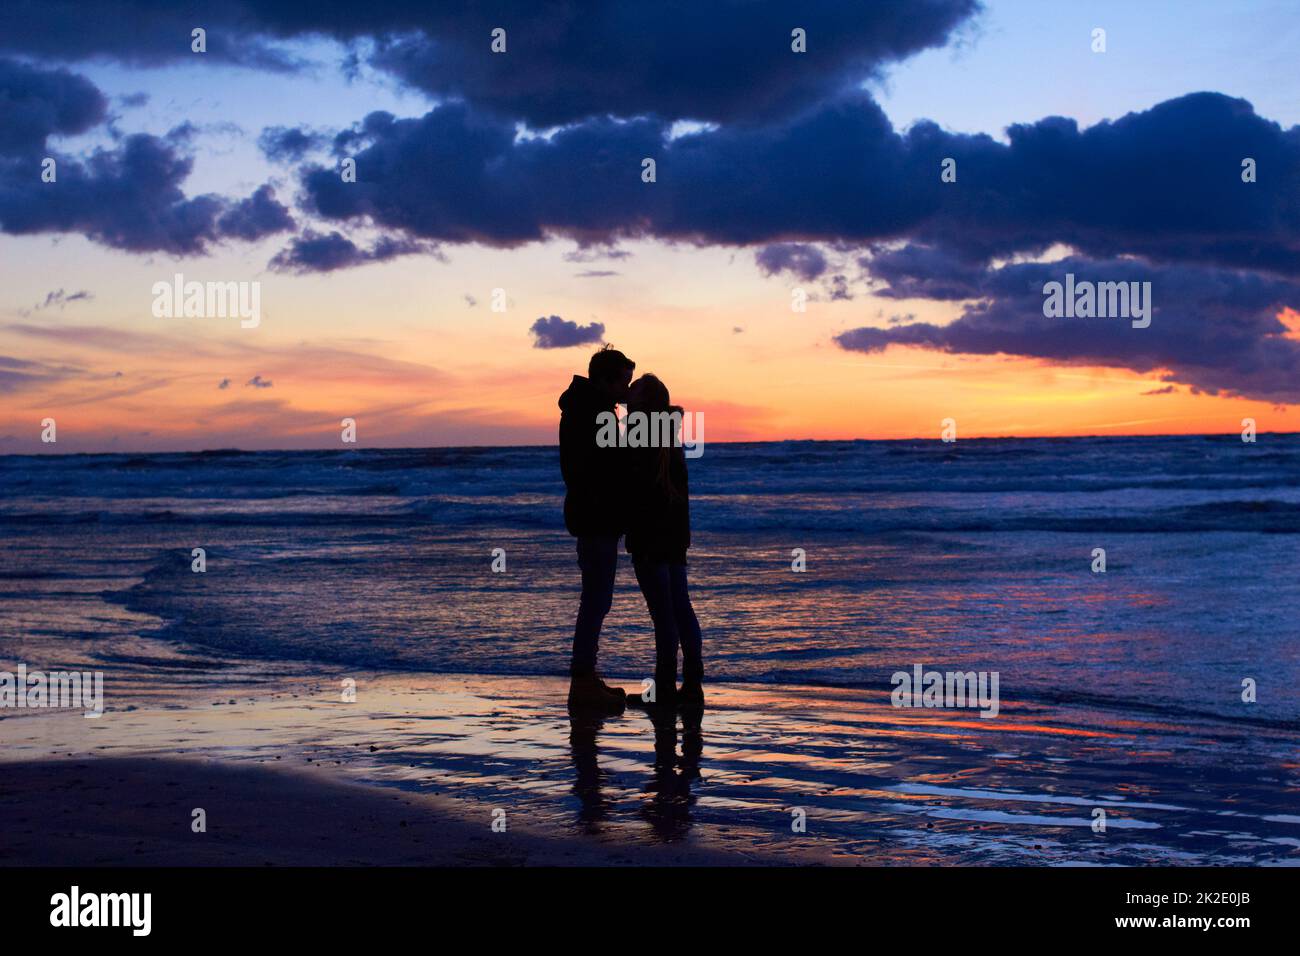 Nature setting the scene for romance. Silouehette of a couple kissing on the beach at sunset. Stock Photo